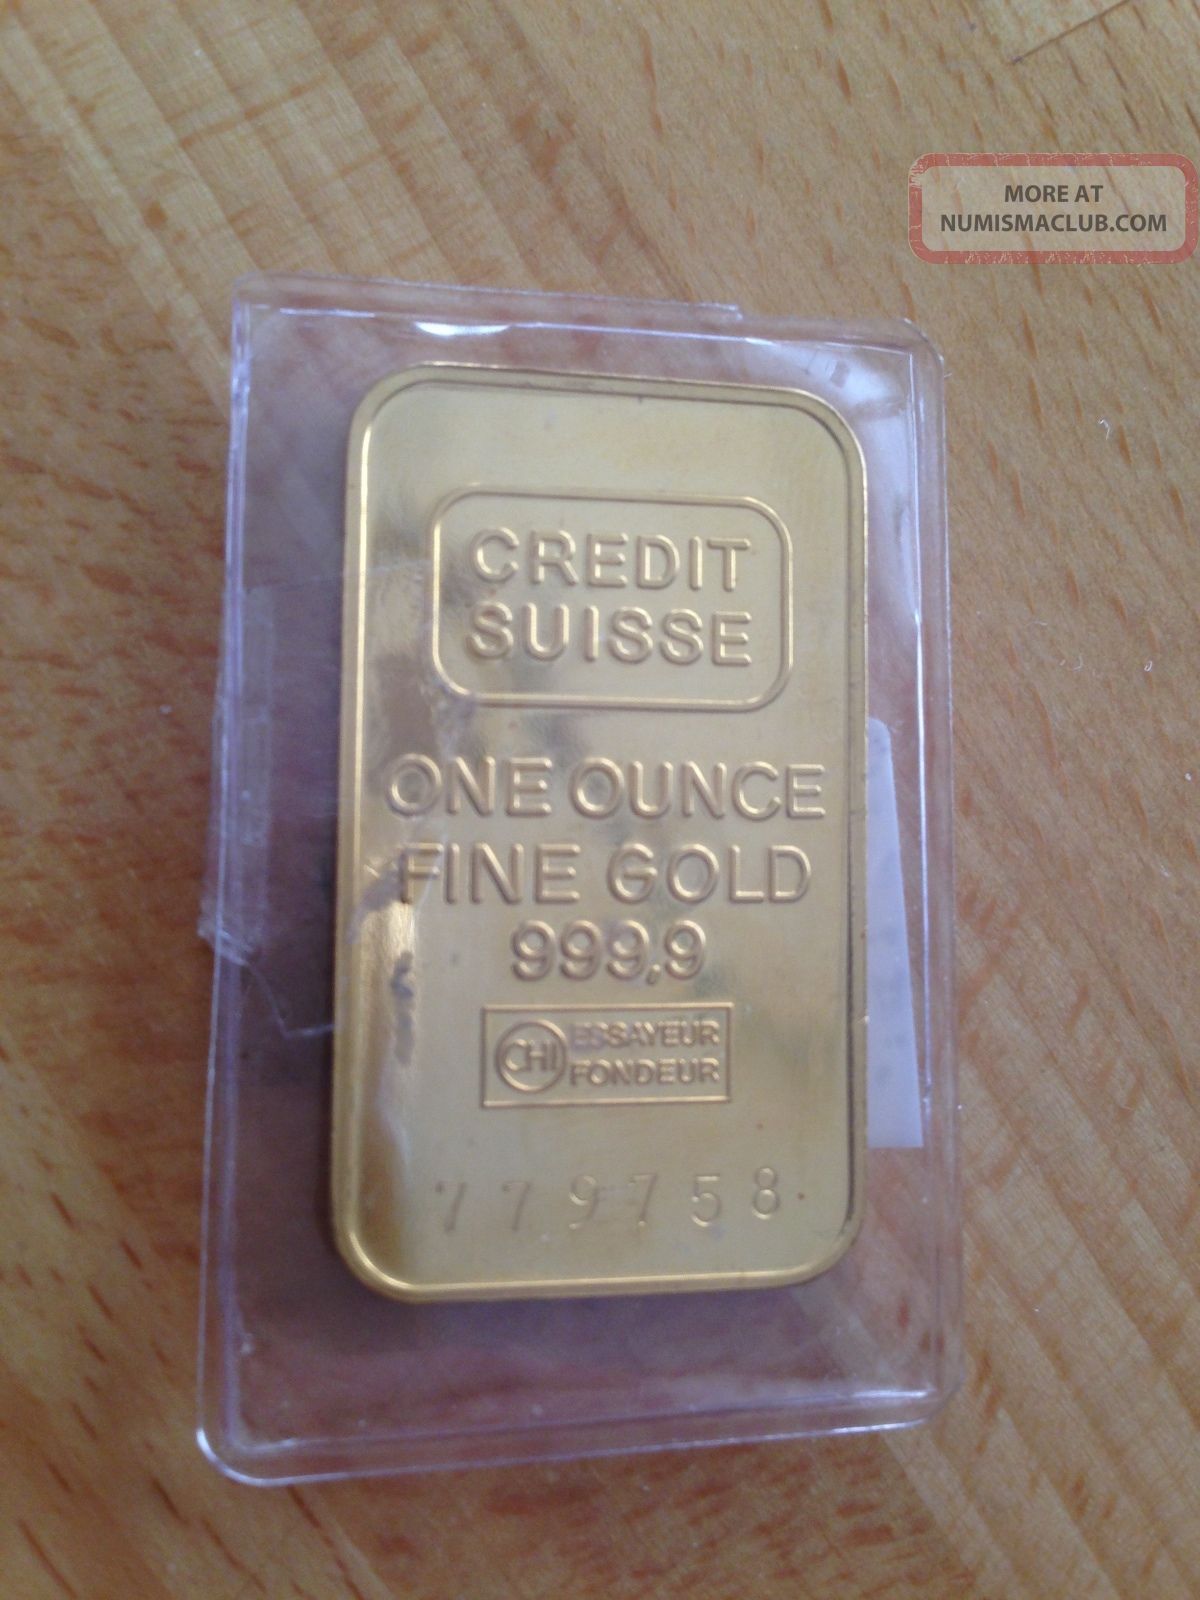 One ounce credit suisse gold bar - nawjp